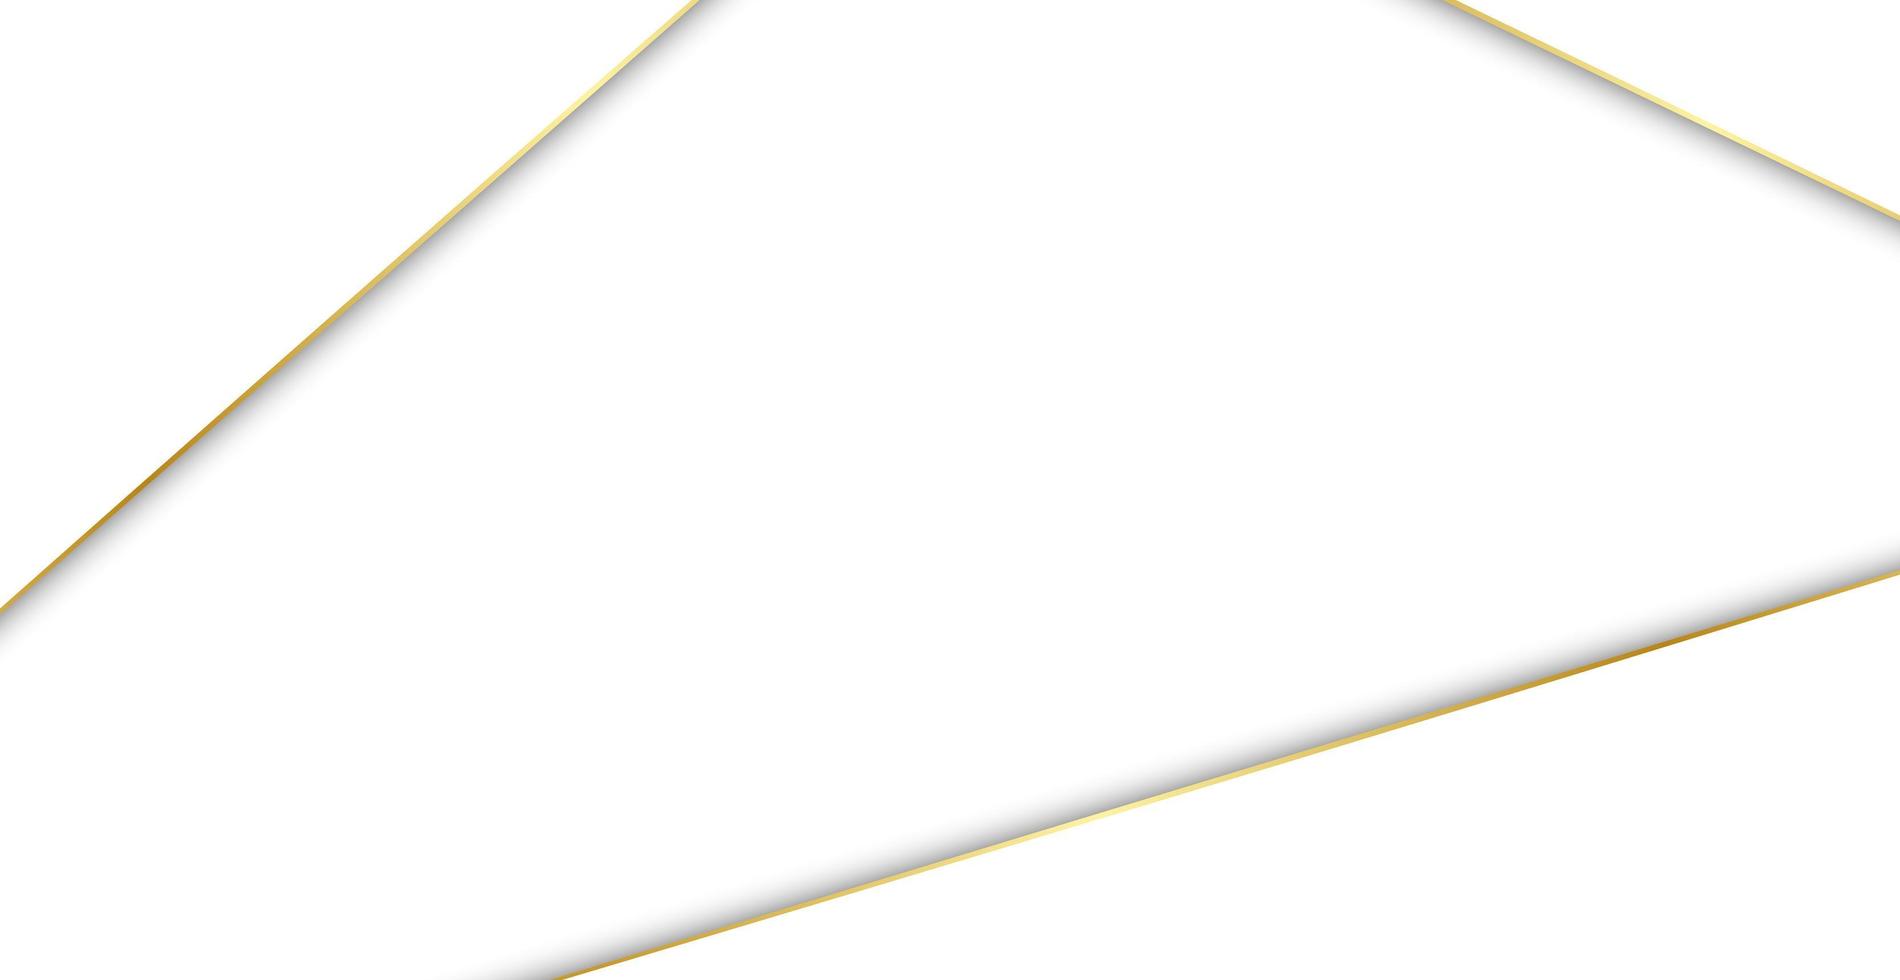 Abstract white background with golden lines - Vector